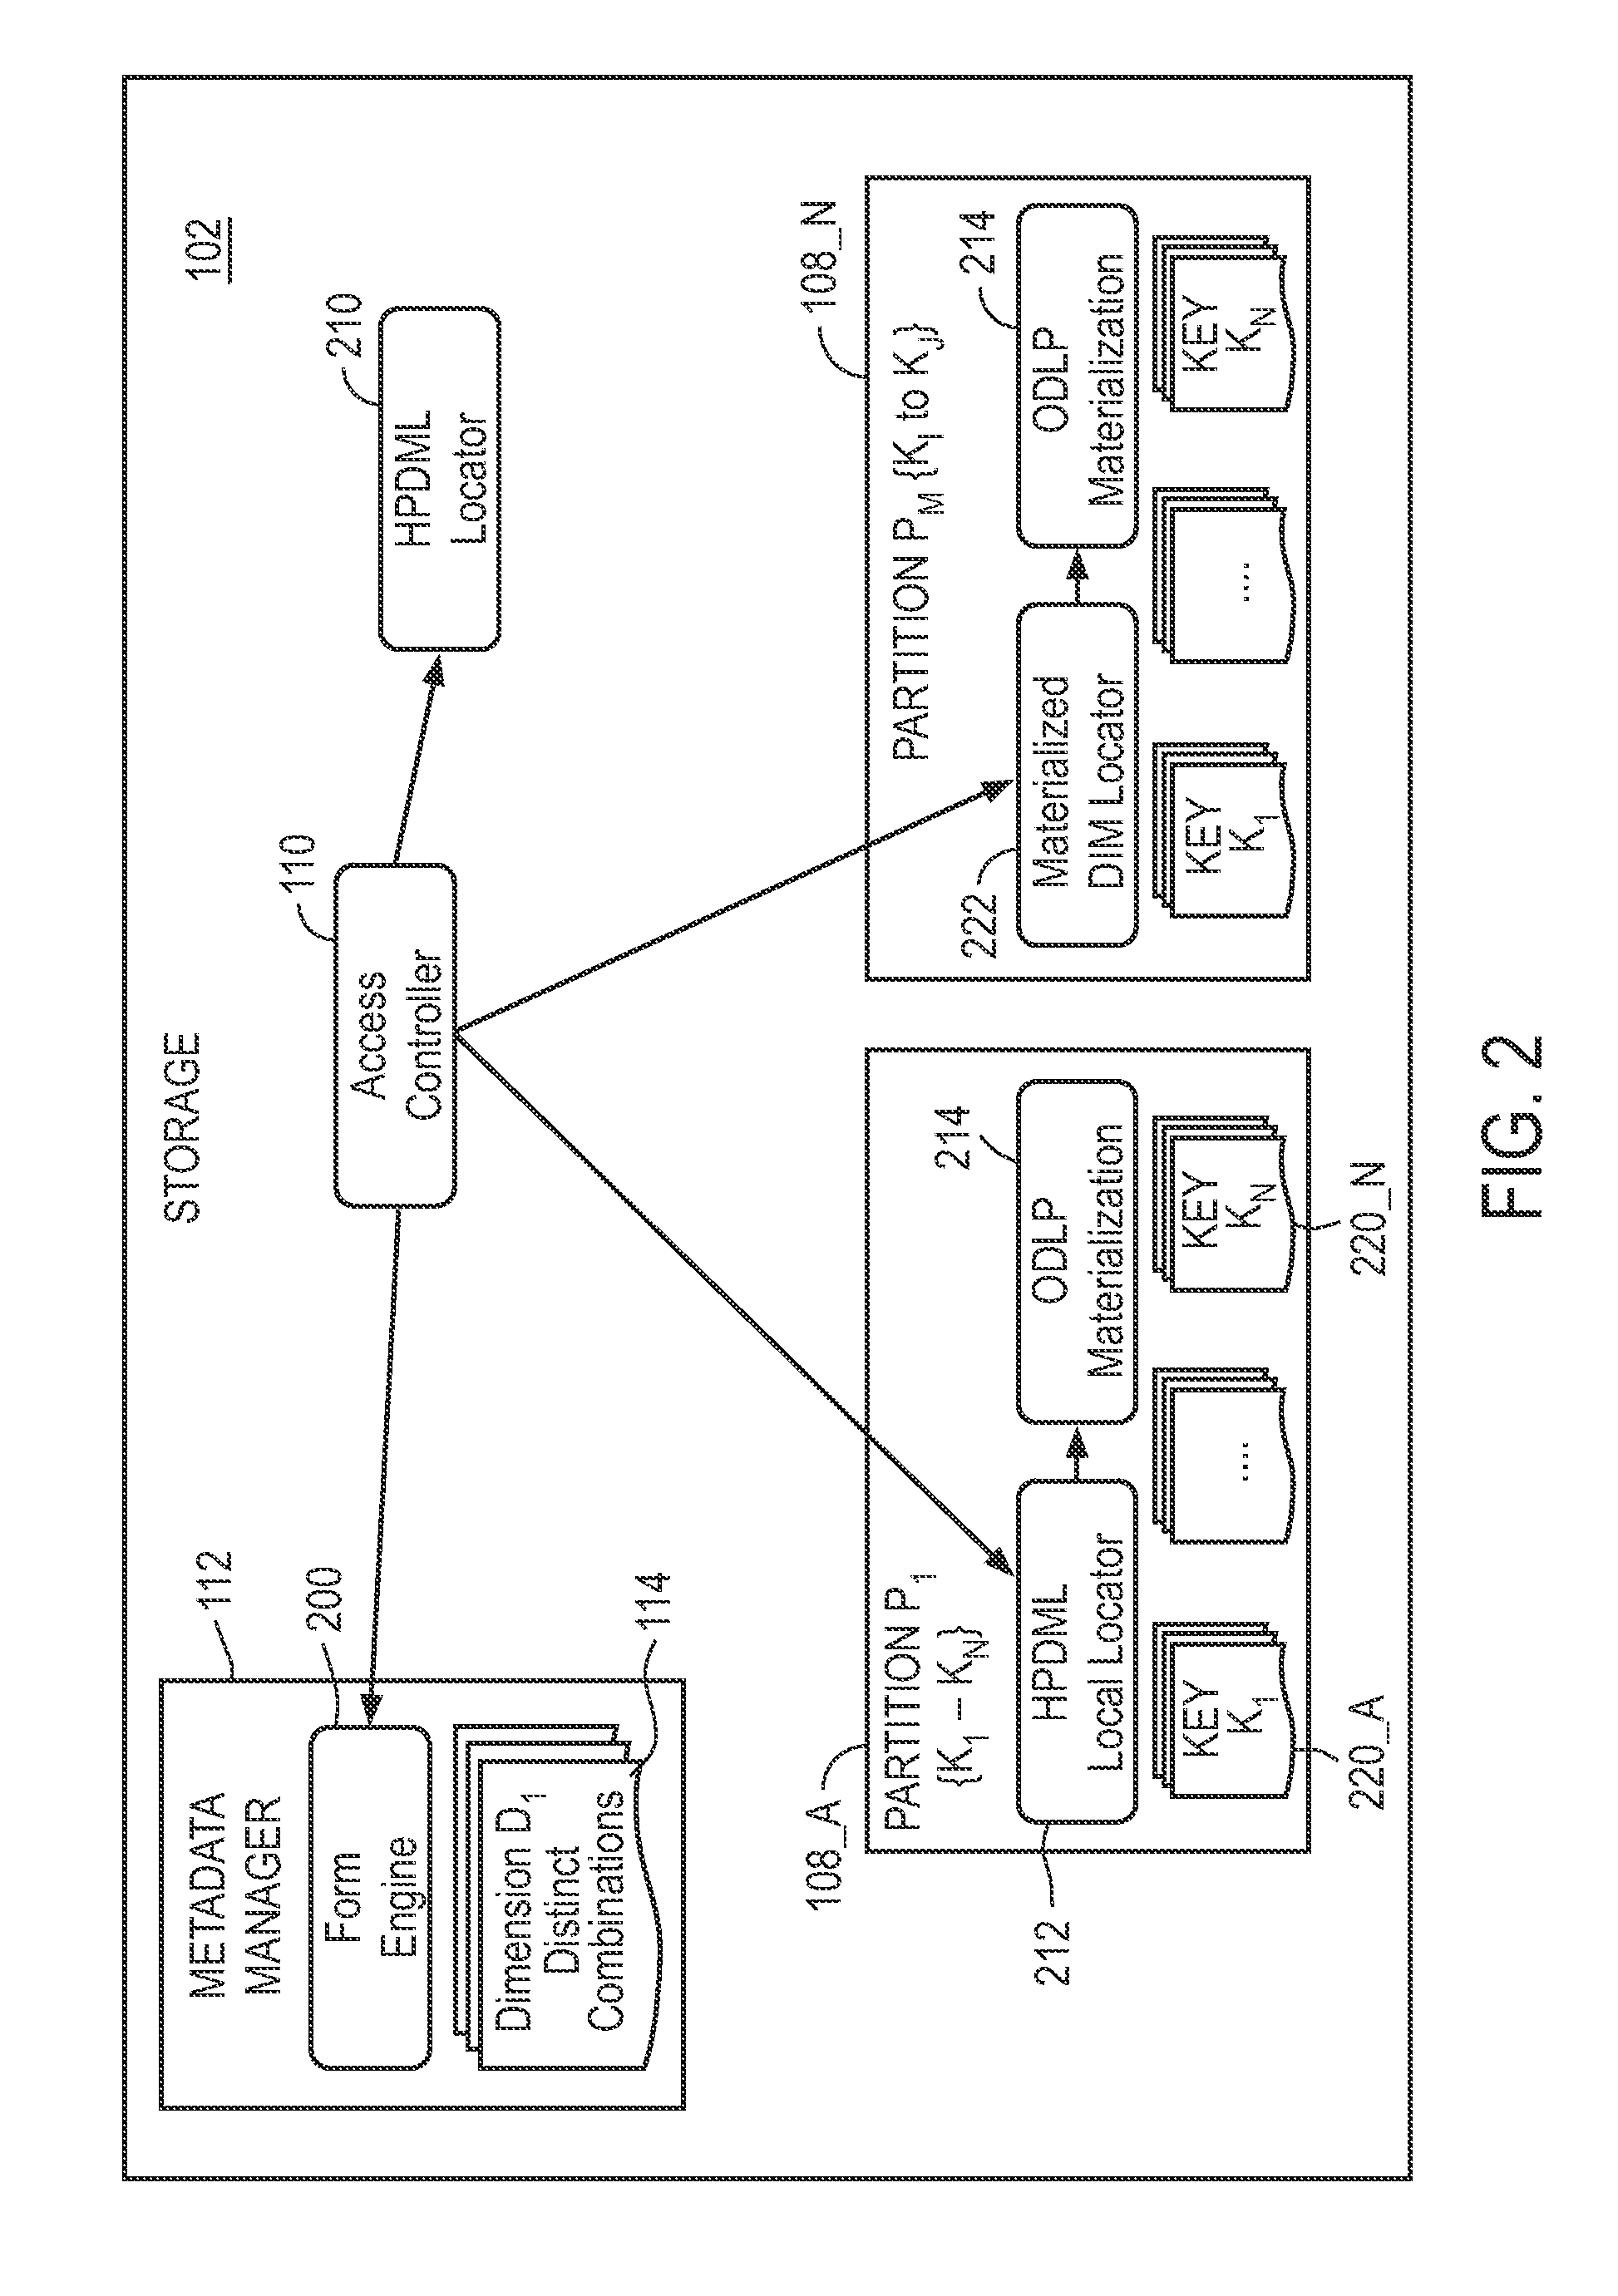 Apparatus and method for accessing materialized and non-materialized values in a shared nothing system